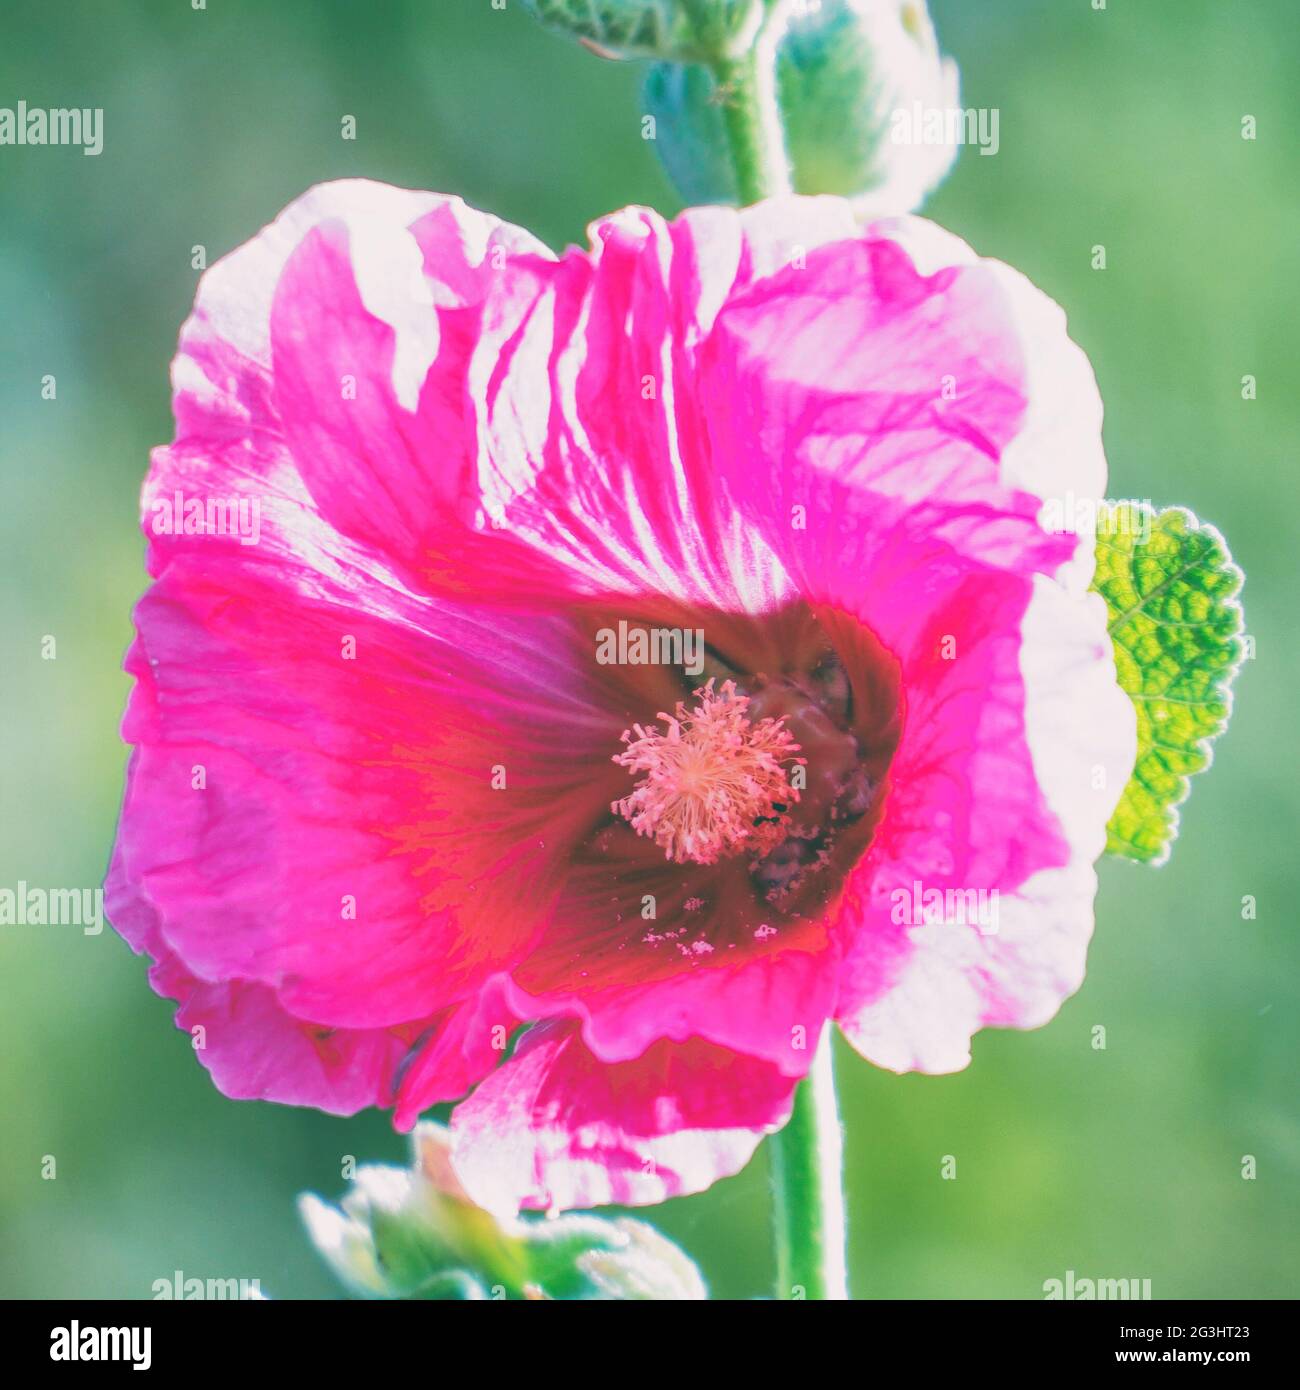 Pink flower mallow or malva in the garden on a natural background. Selective focus Stock Photo